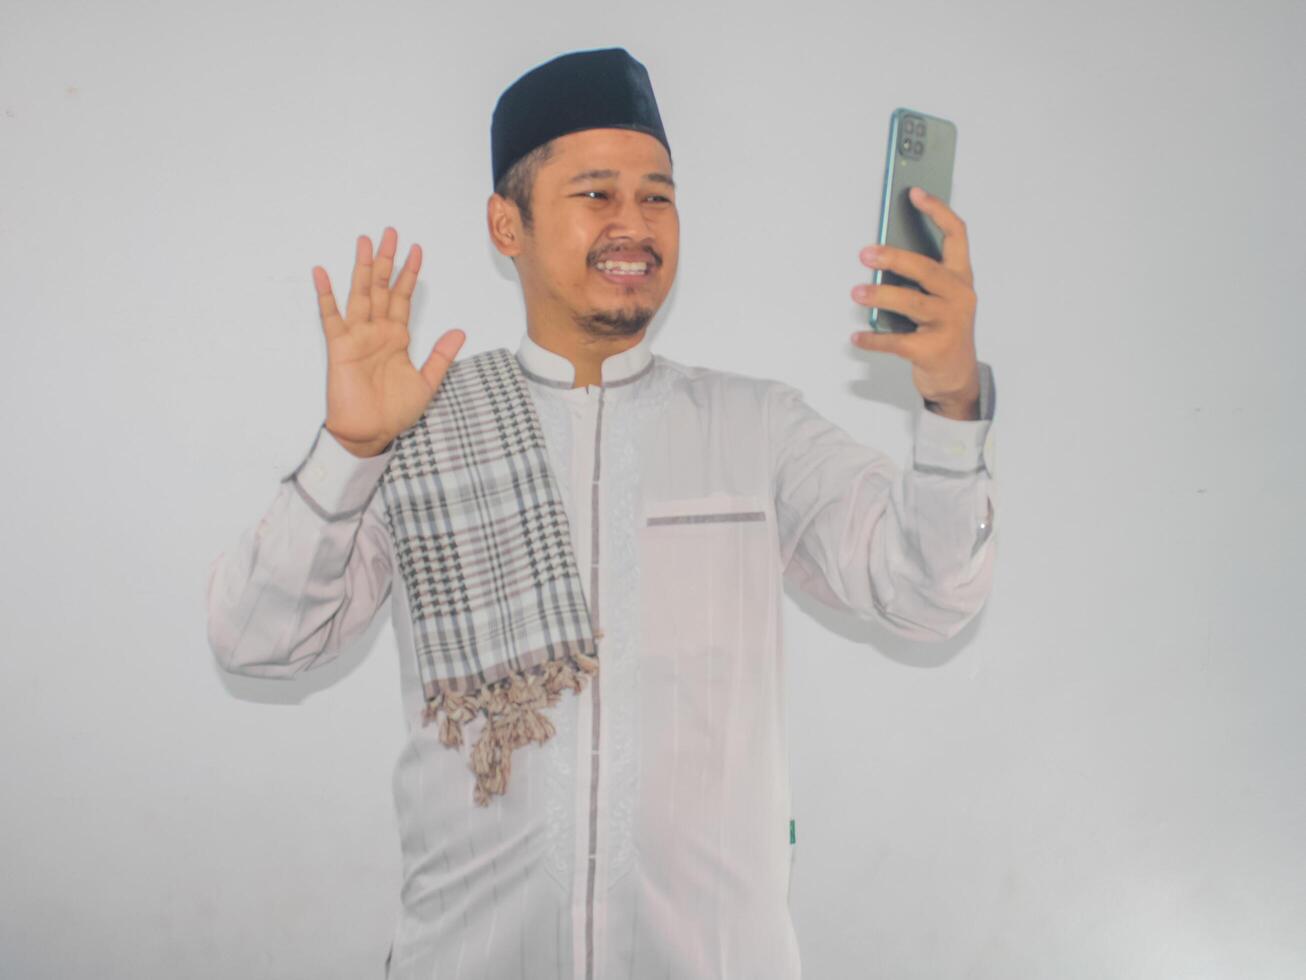 Moslem Asian man showing excited face expression during call with his family during Ramadan celebration photo